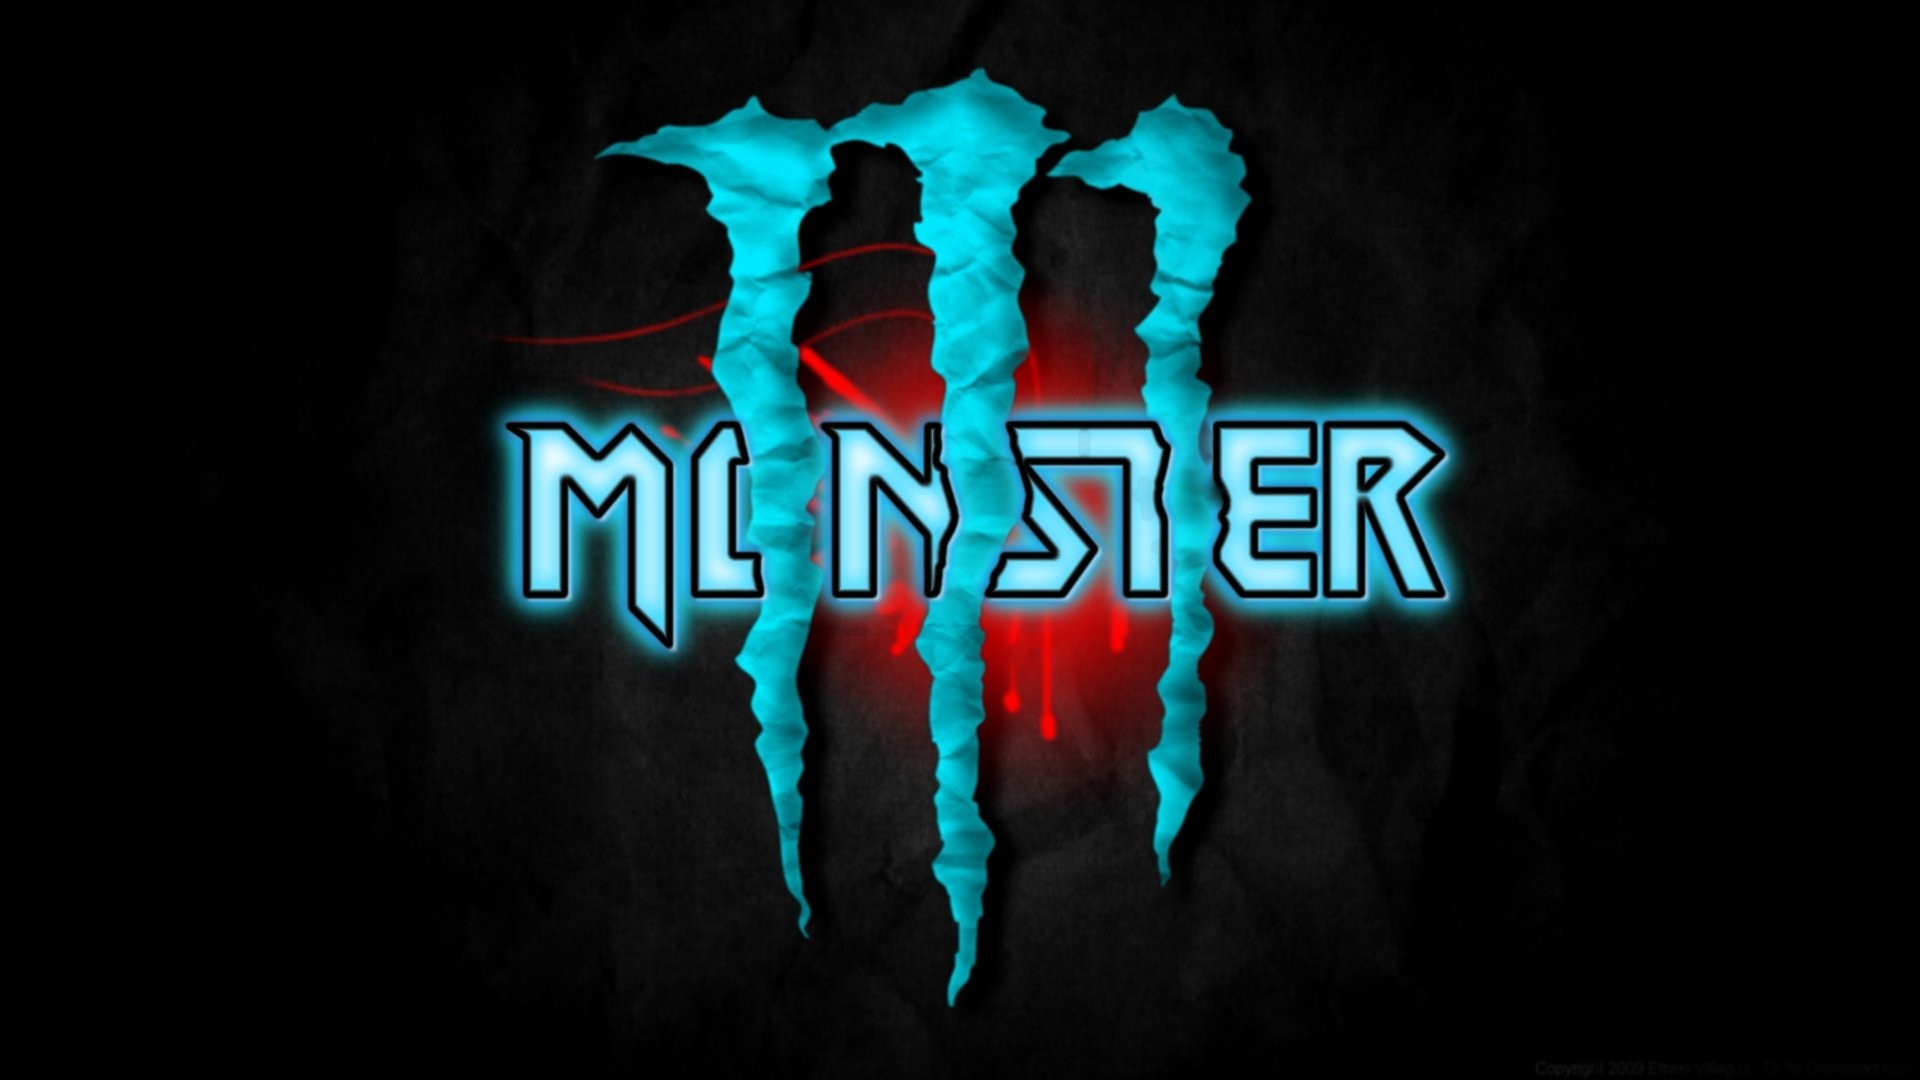 1920x1080  Products - Monster Energy Drink Wallpaper Â· Download Â· photos ...